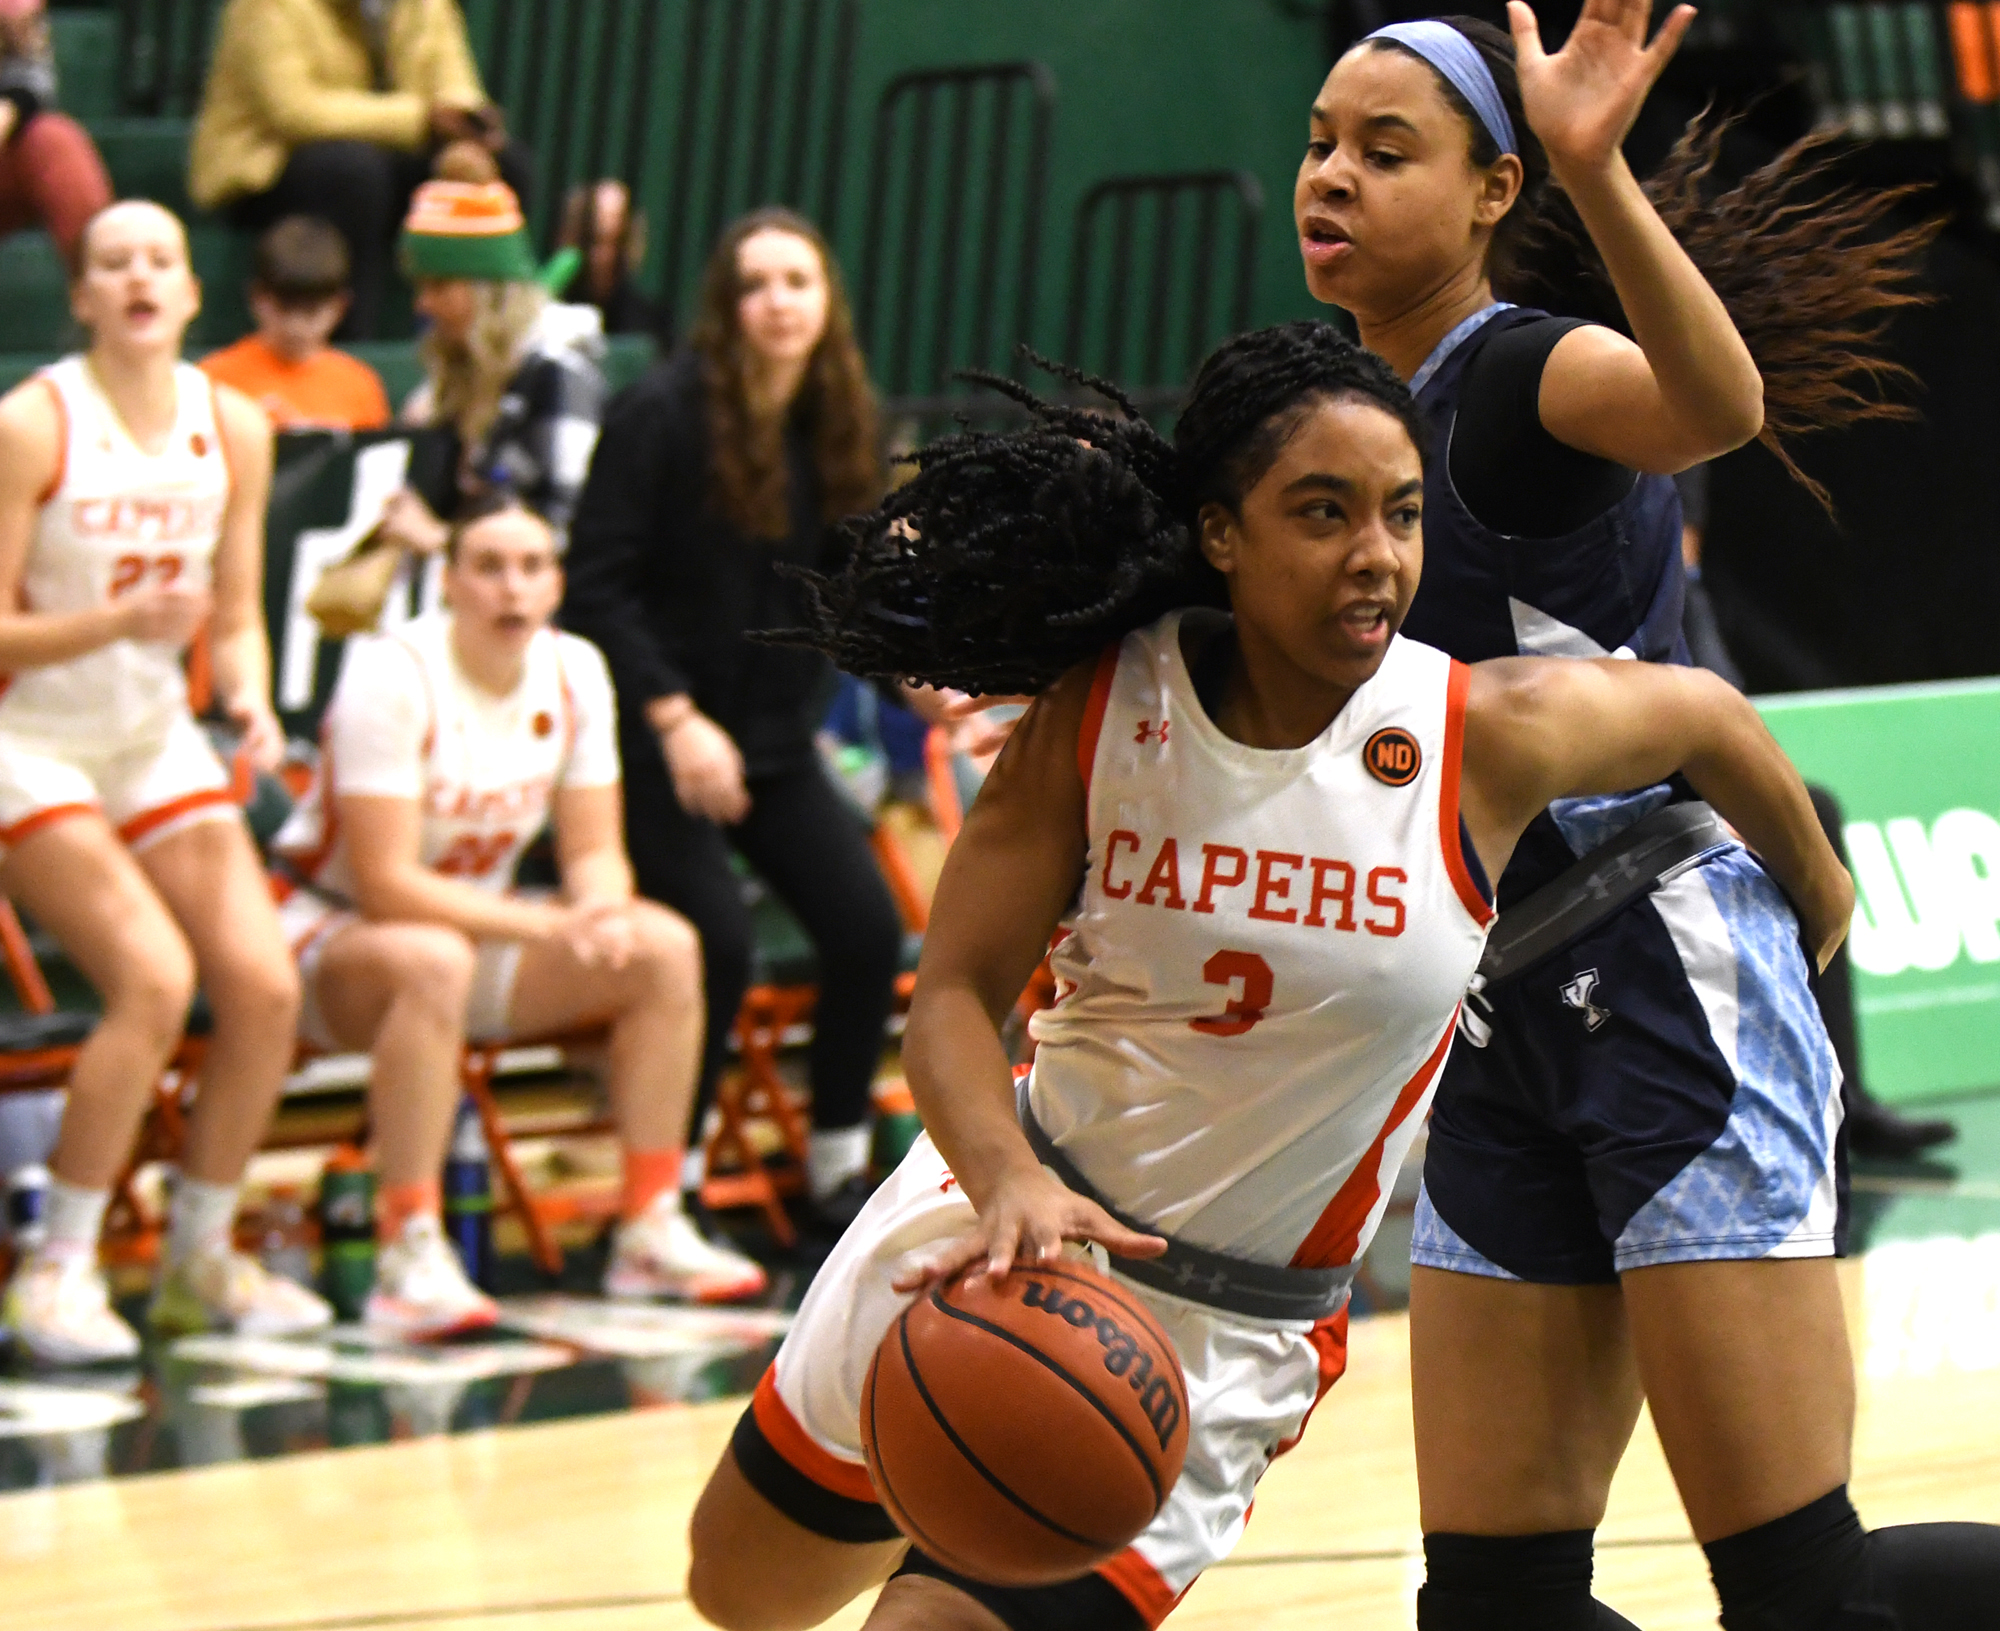 CAPERS Fall to X-Women 95-85